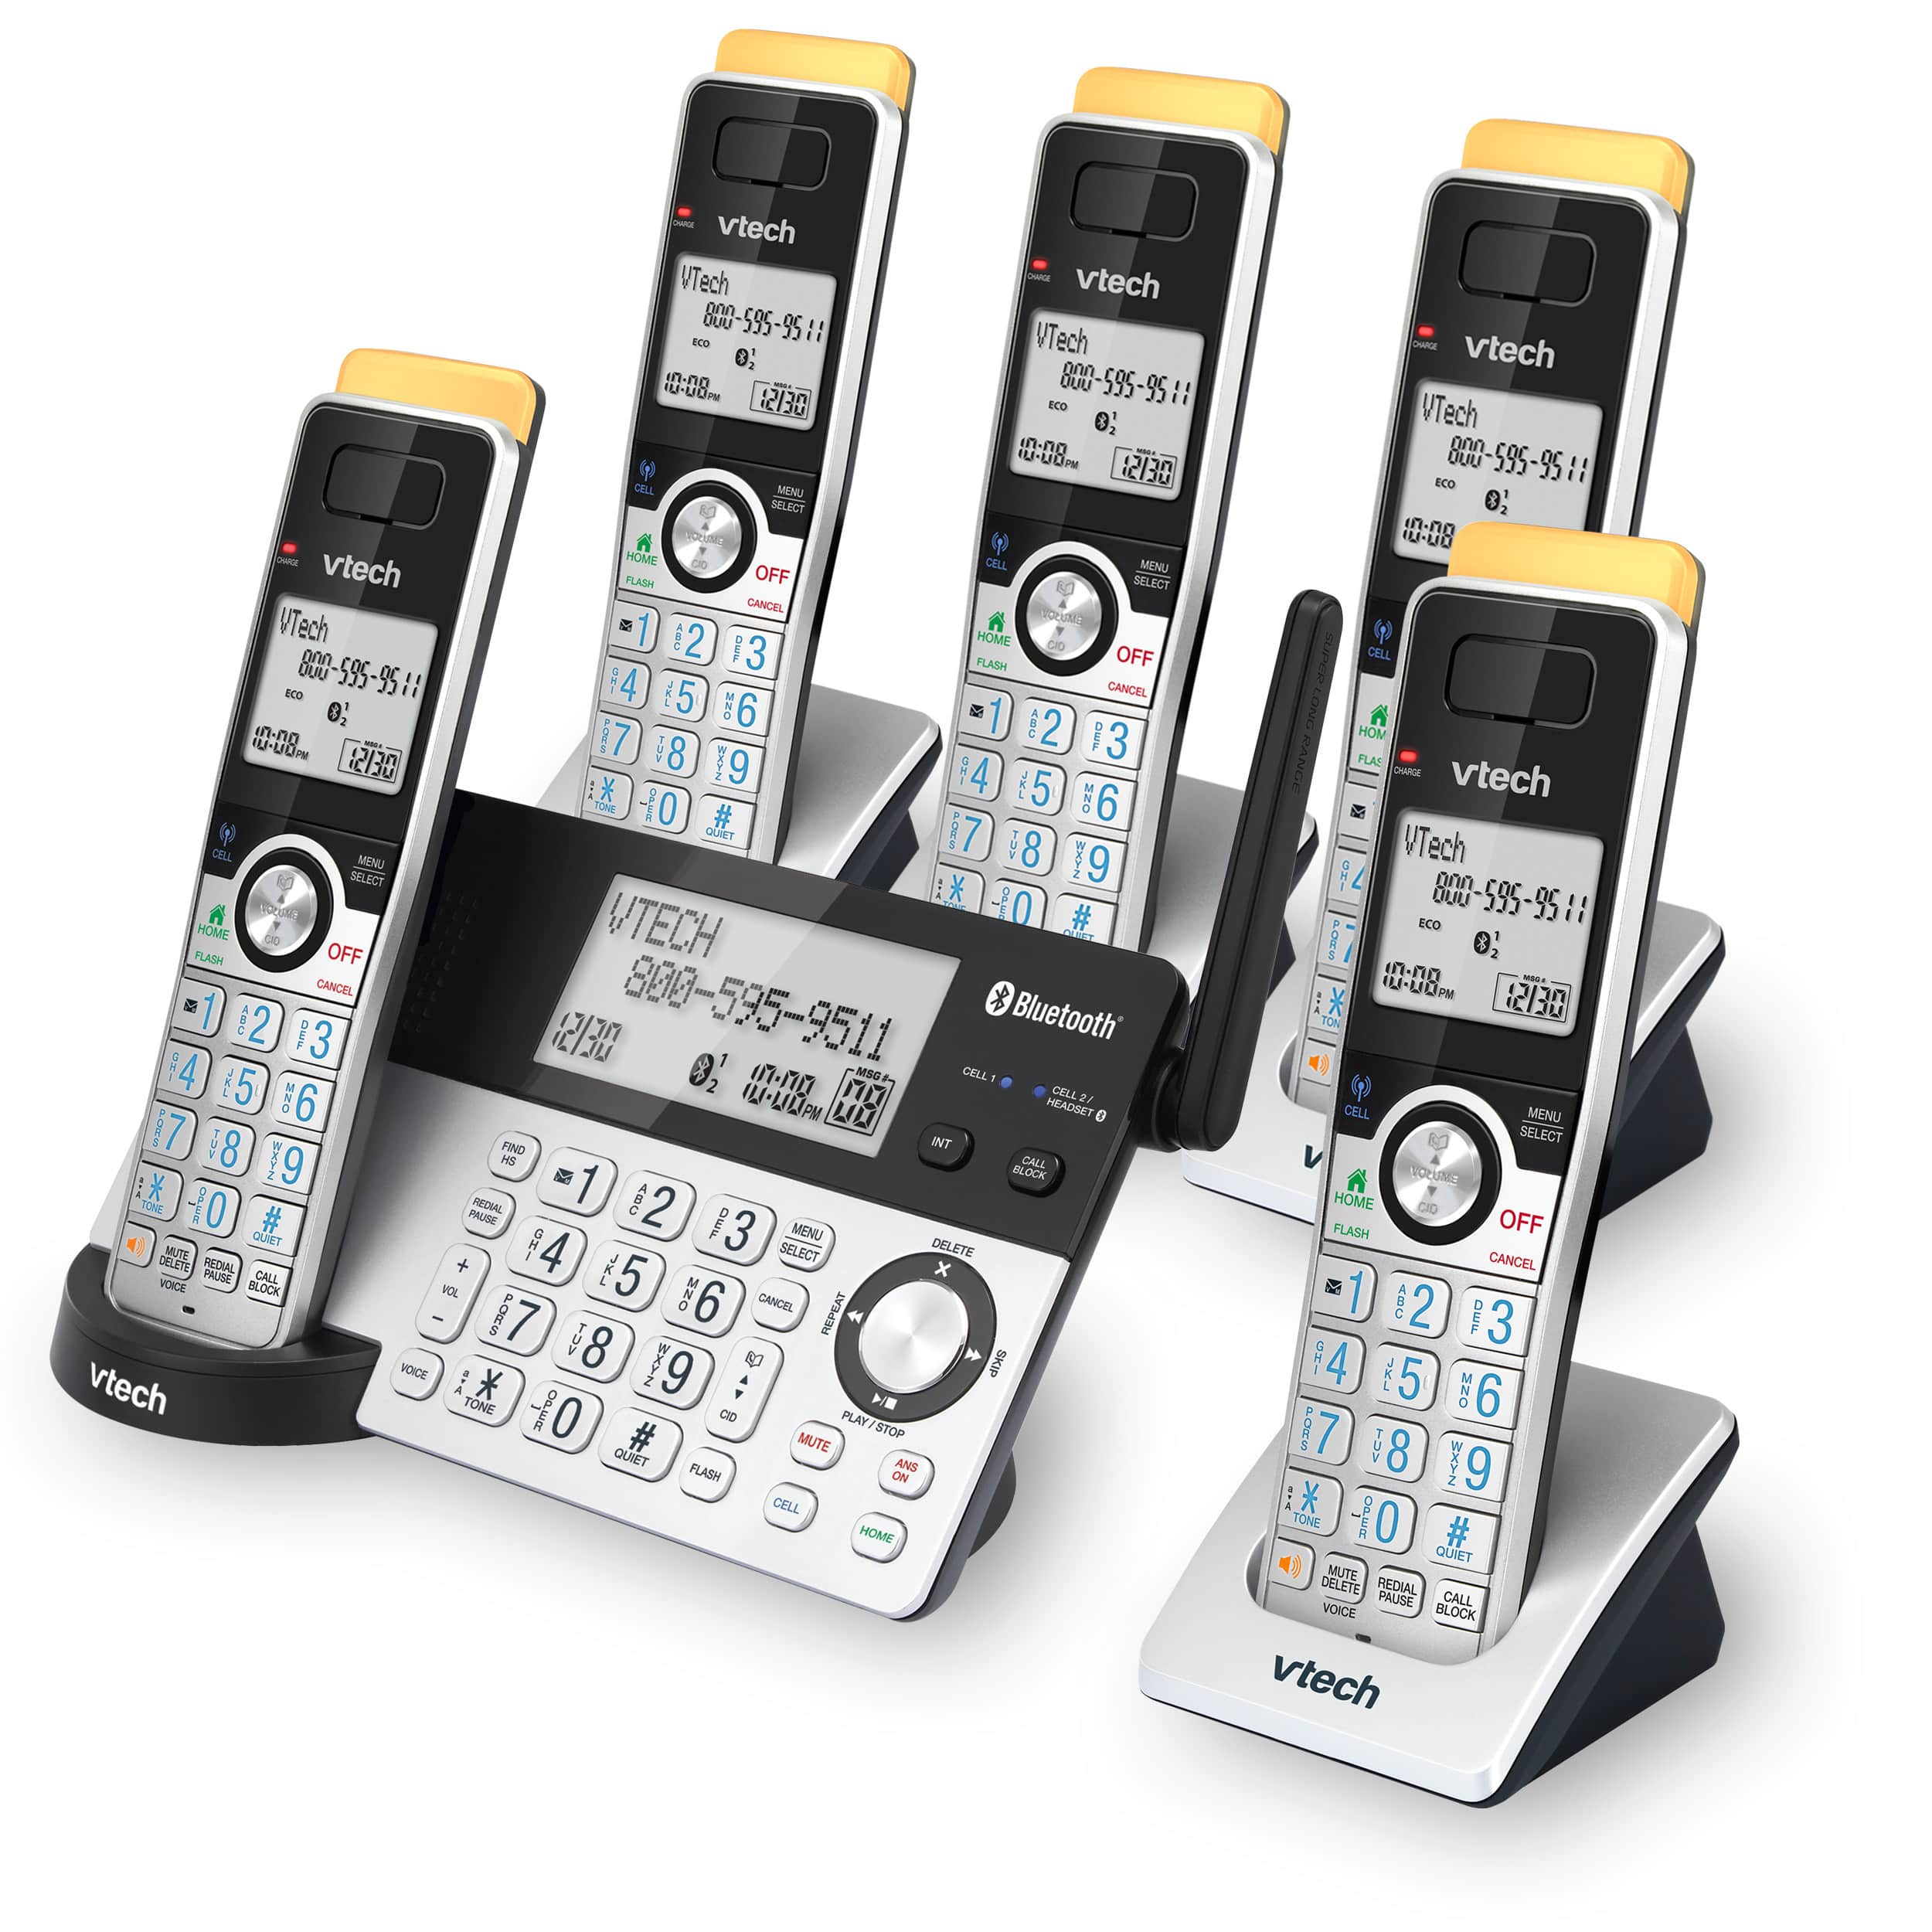 5-Handset Expandable Cordless Phone with Super Long Range, Bluetooth Connect to Cell, Smart Call Blocker and Answering System - view 8